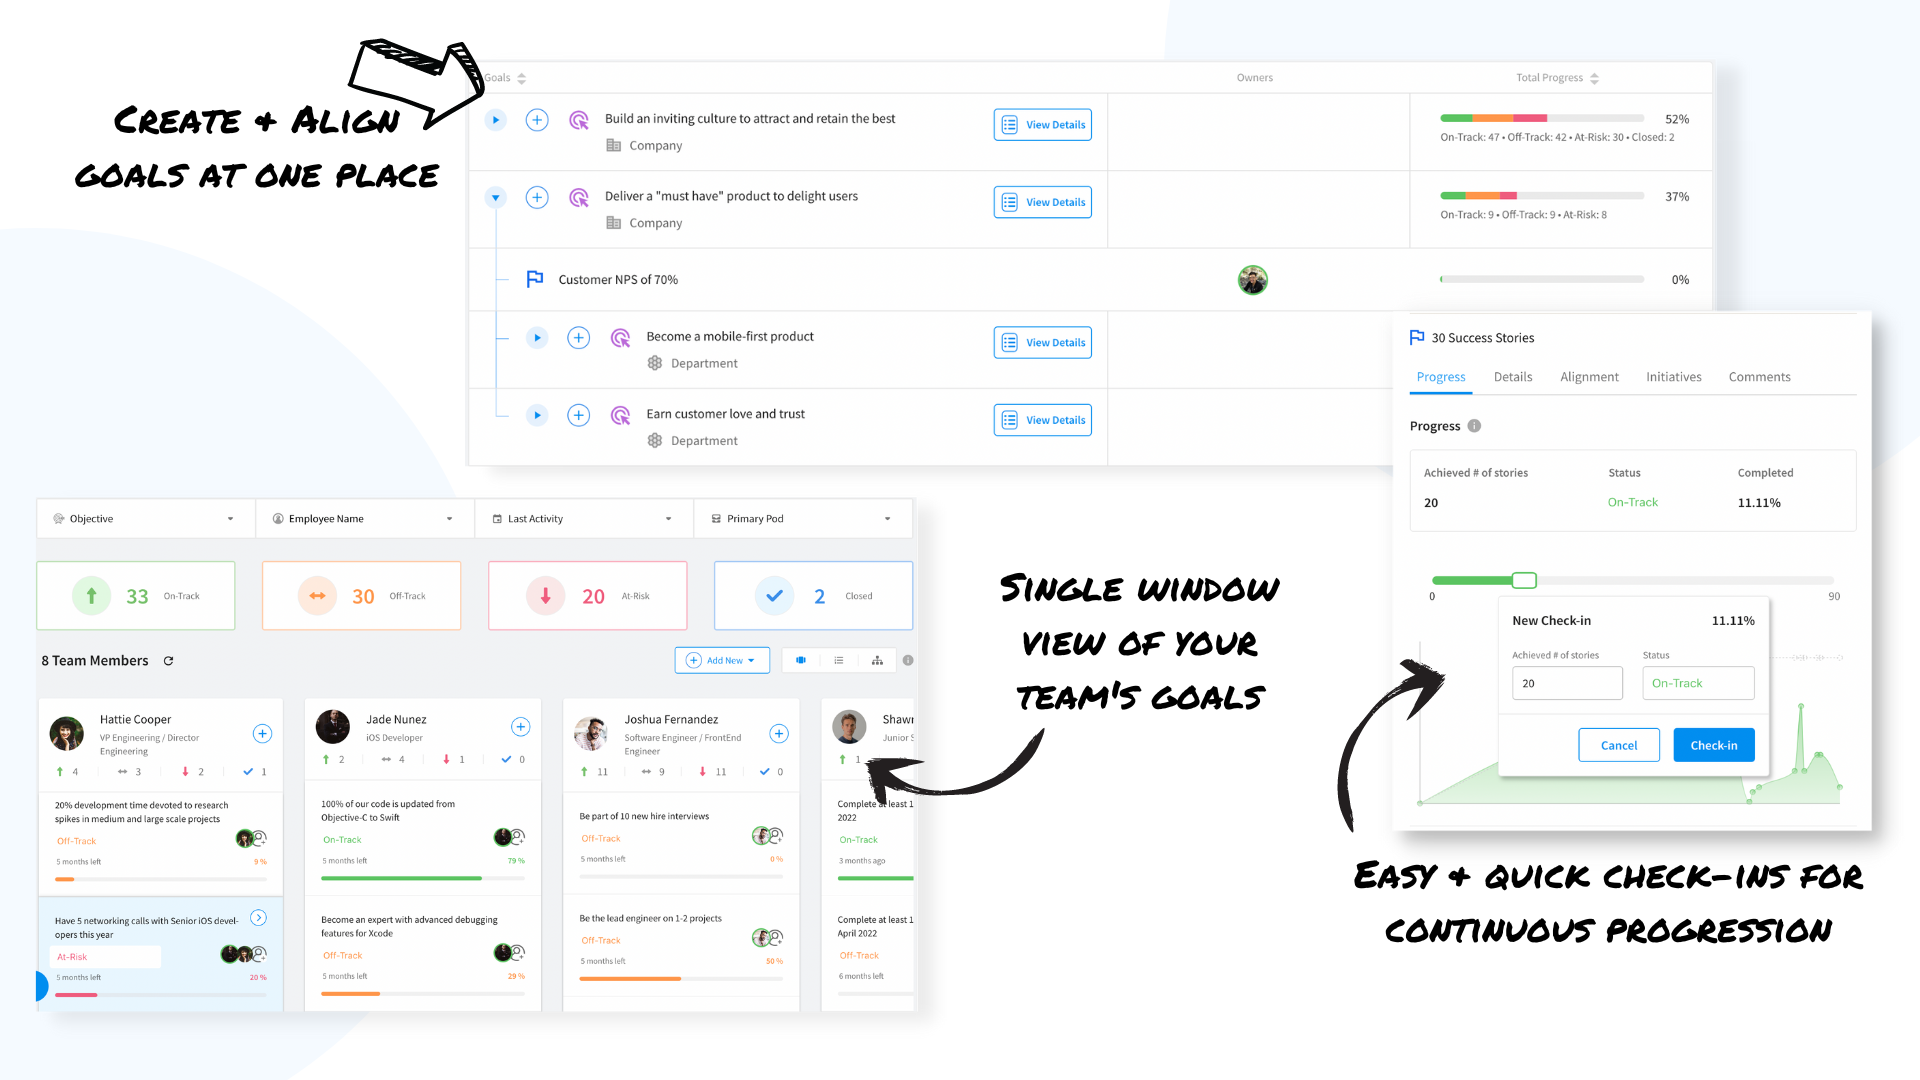 Quick check-ins, centralised view of your team’s OKRs and easy creation and realignment are just some of the features that make managing OKRs on Mesh a breeze. Helps employees with continuous progression and enables managers to always be on top of goals